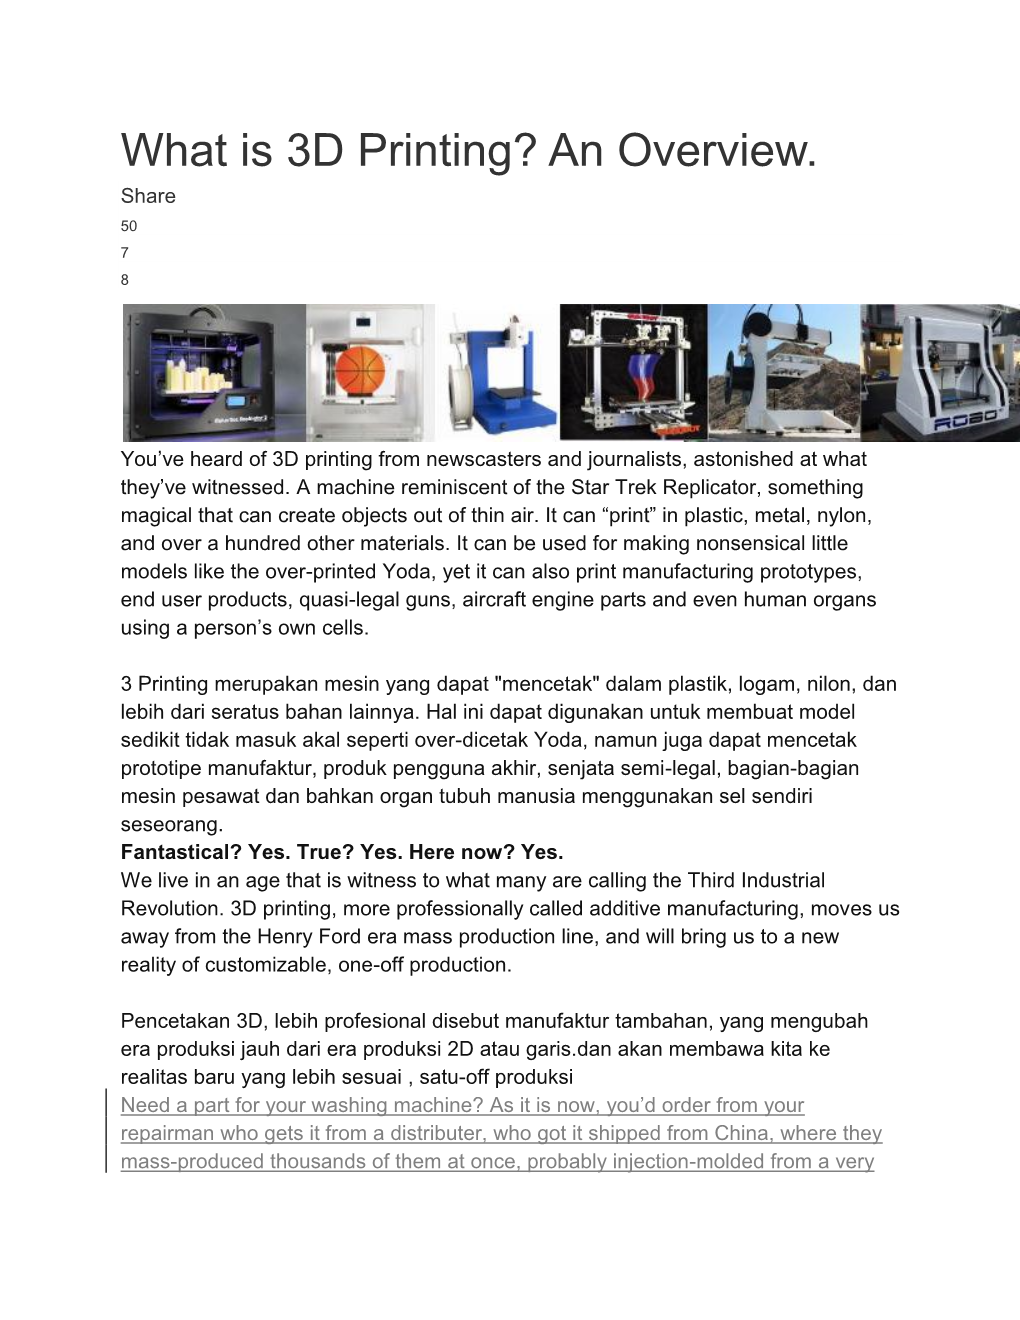 What Is 3D Printing? an Overview